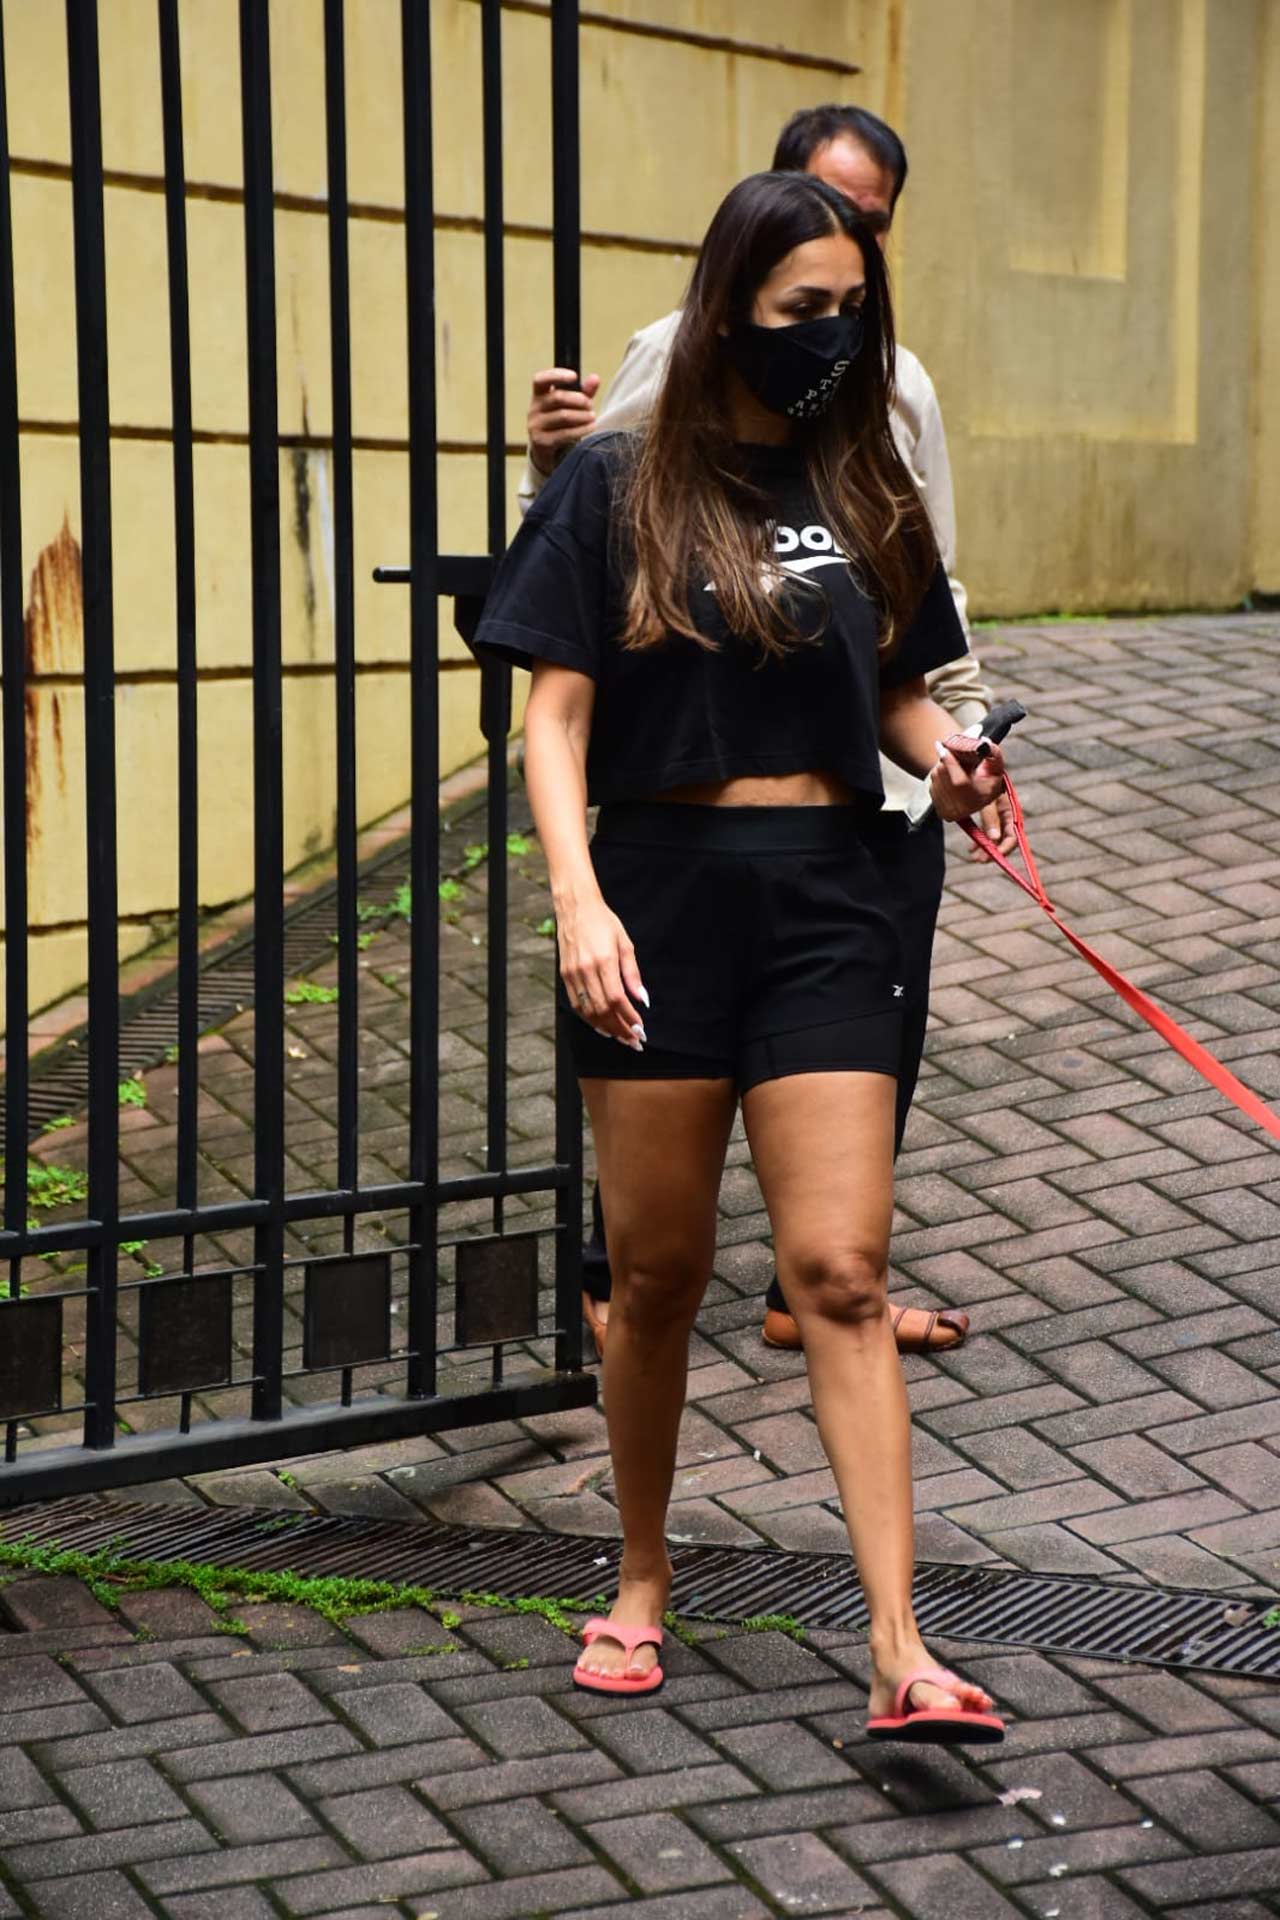 Malaika Arora, who was out for a walk later in the day, sported a black athleisure as she walked her pet, Casper.